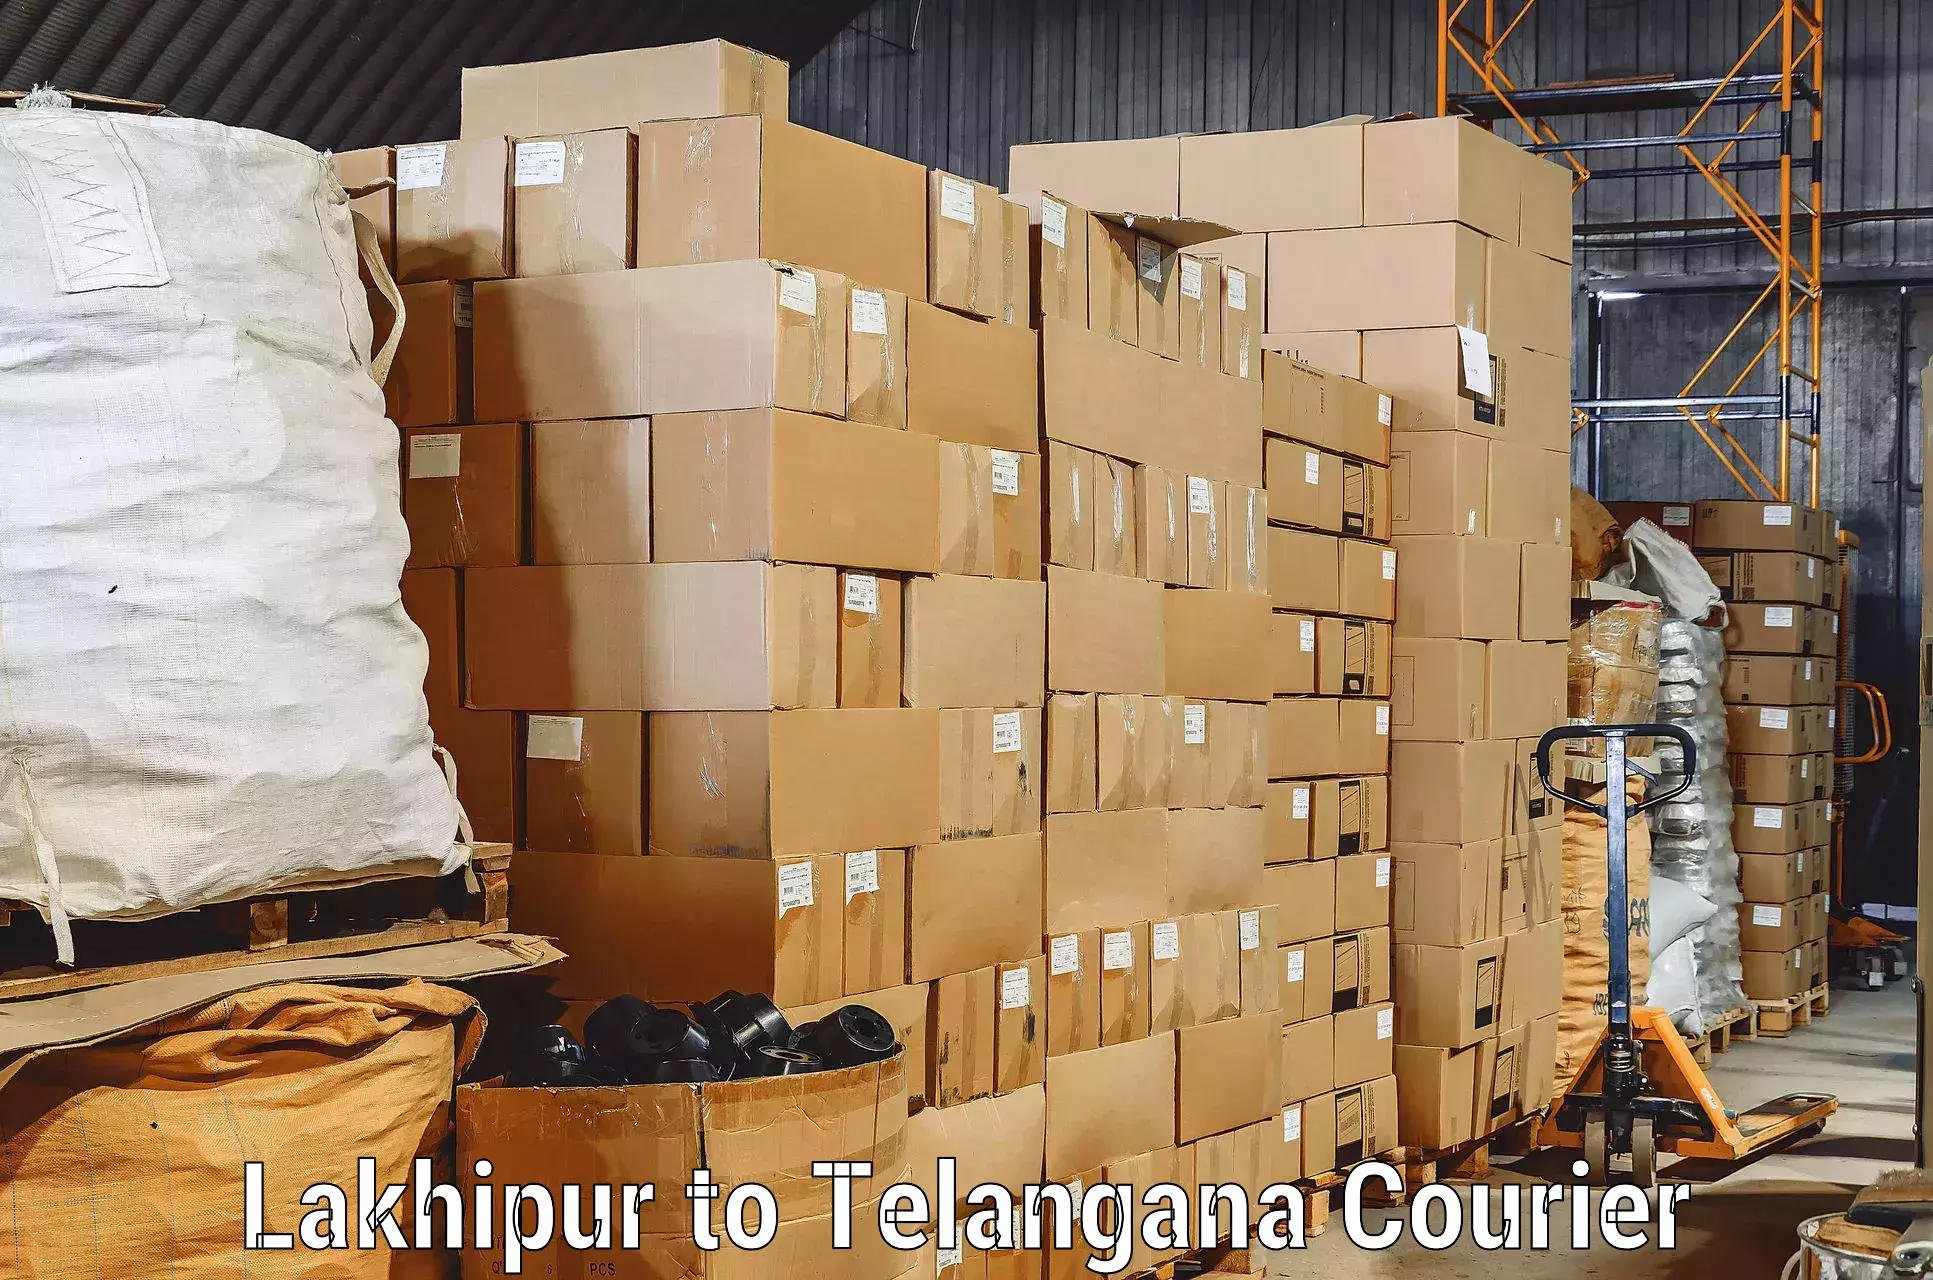 Household moving experts Lakhipur to Manneguda